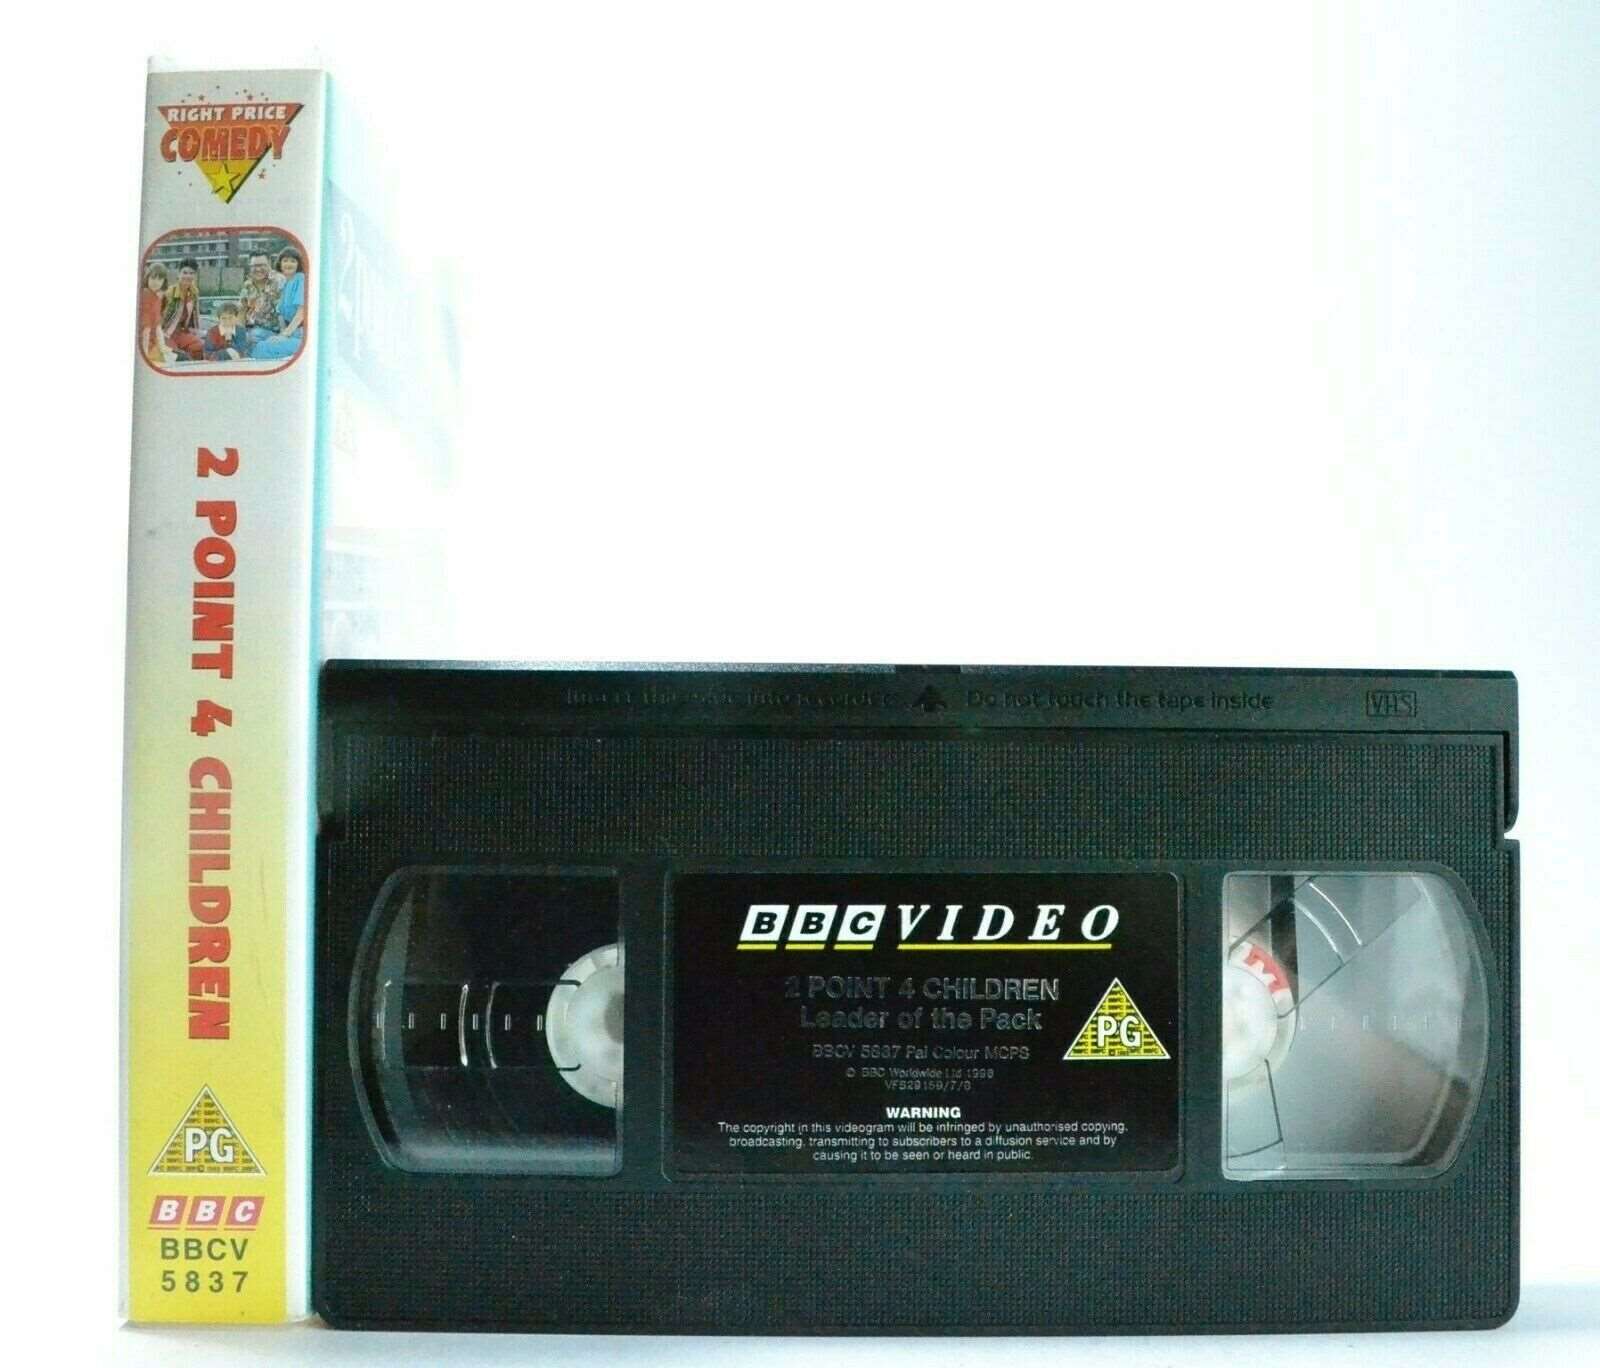 2 Point 4 Children: By Andrew Marshall - BBC Comedy Series - 3 Episodes - VHS-